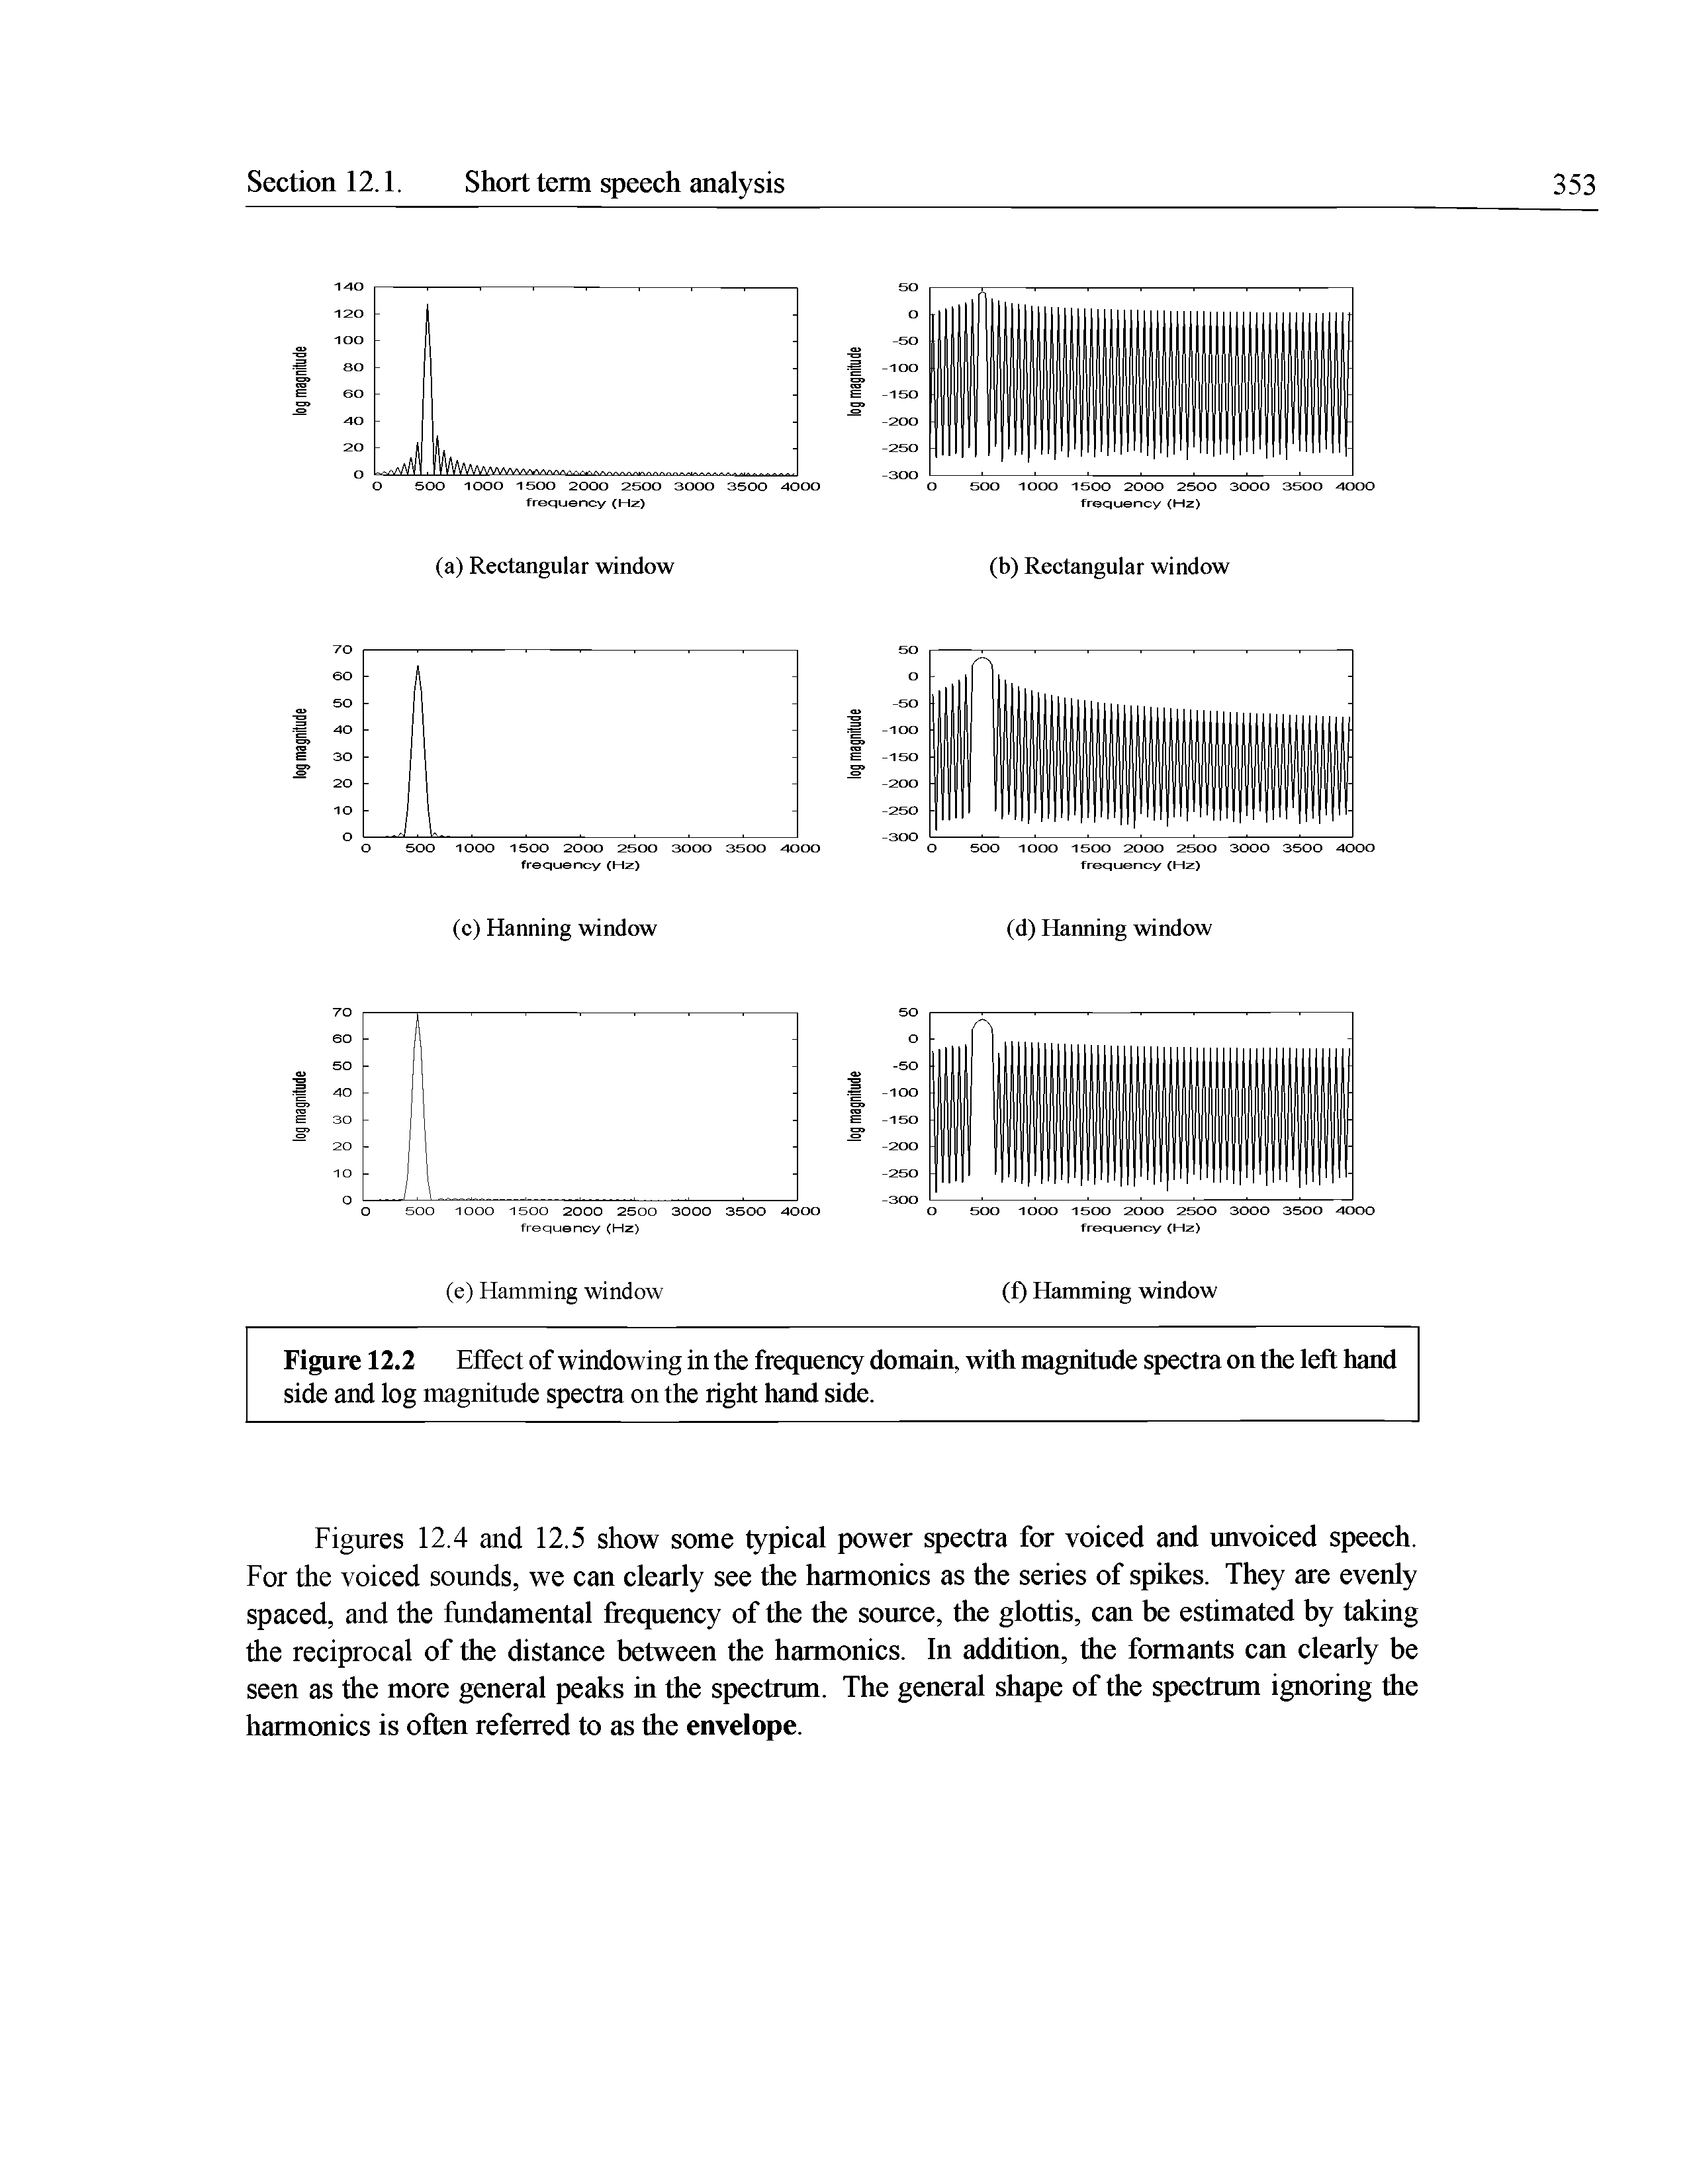 Figures 12.4 and 12.5 show some typical power spectra for voiced and unvoiced speech. For the voiced sounds, we can clearly see the harmonics as the series of spikes. They are evenly spaced, and the fundamental frequency of the the source, the glottis, can be estimated by taking the reciprocal of the distance between the harmonics. In addition, the formants can clearly be seen as the more general peaks in the spectrum. The general shape of the spectrum ignoring the harmonics is often referred to as the envelope.